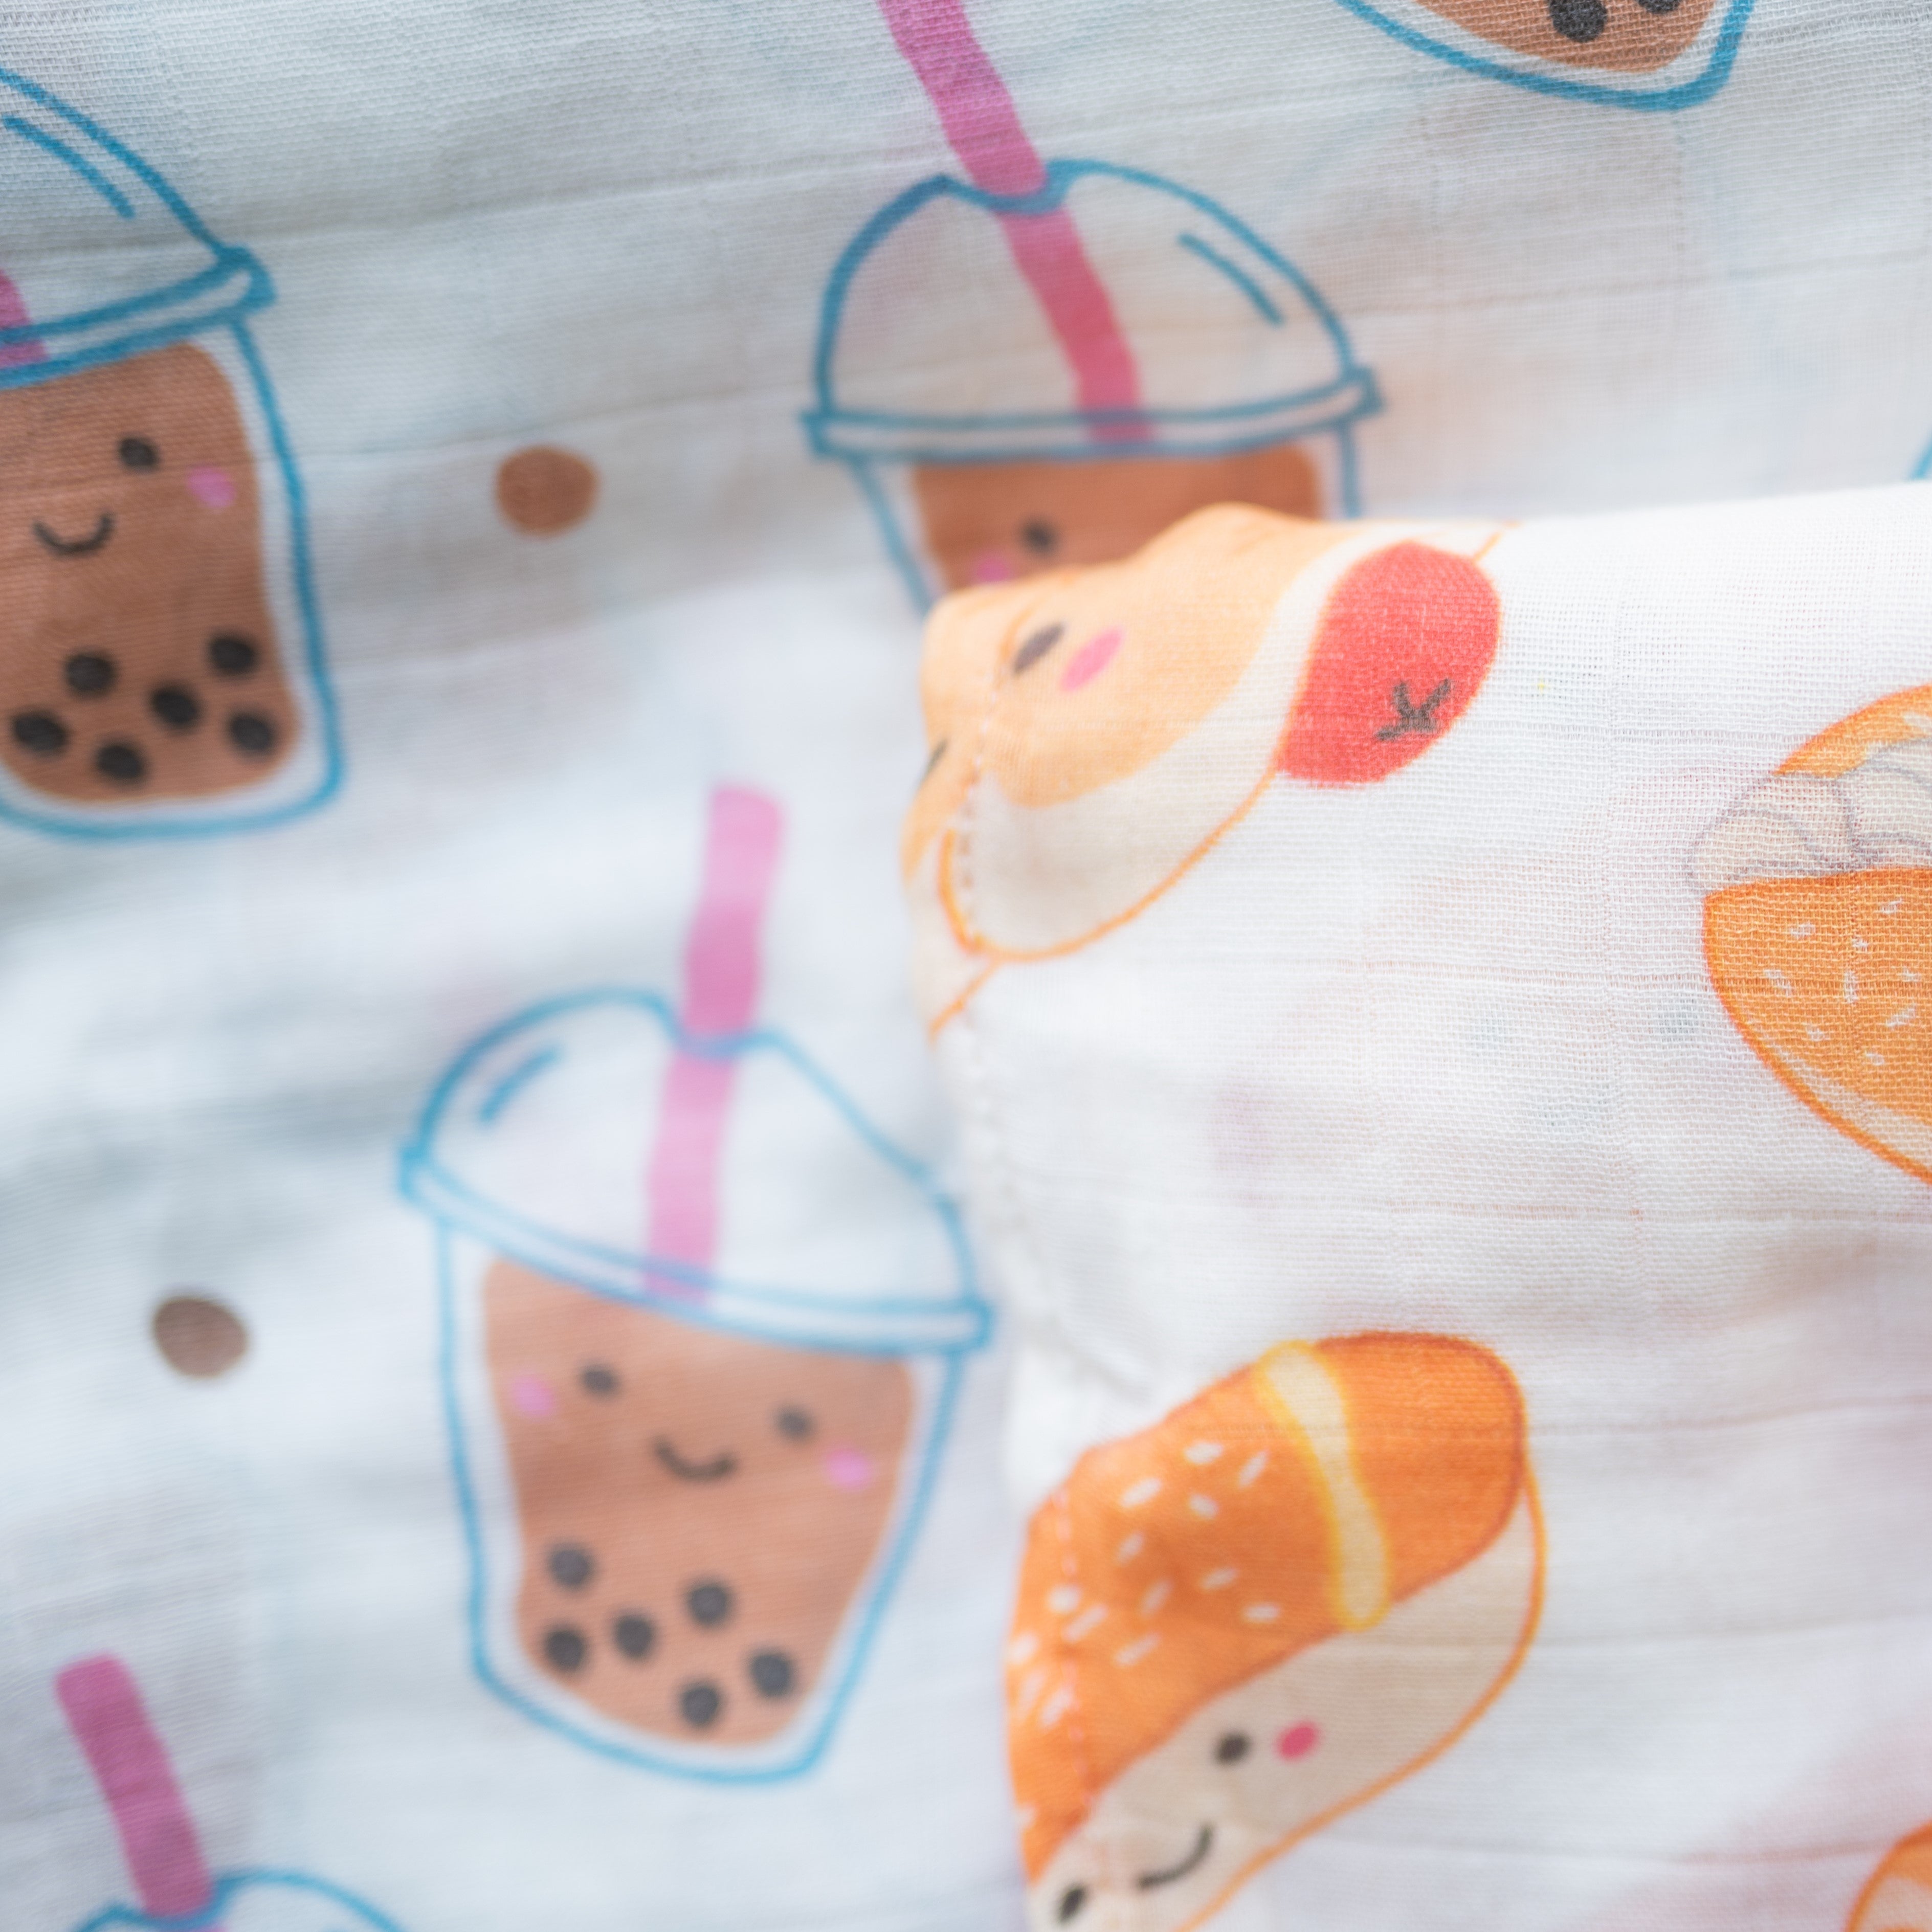 the wee bean super soft organic cotton and bamboo swaddle in boba bubble tea close up texture